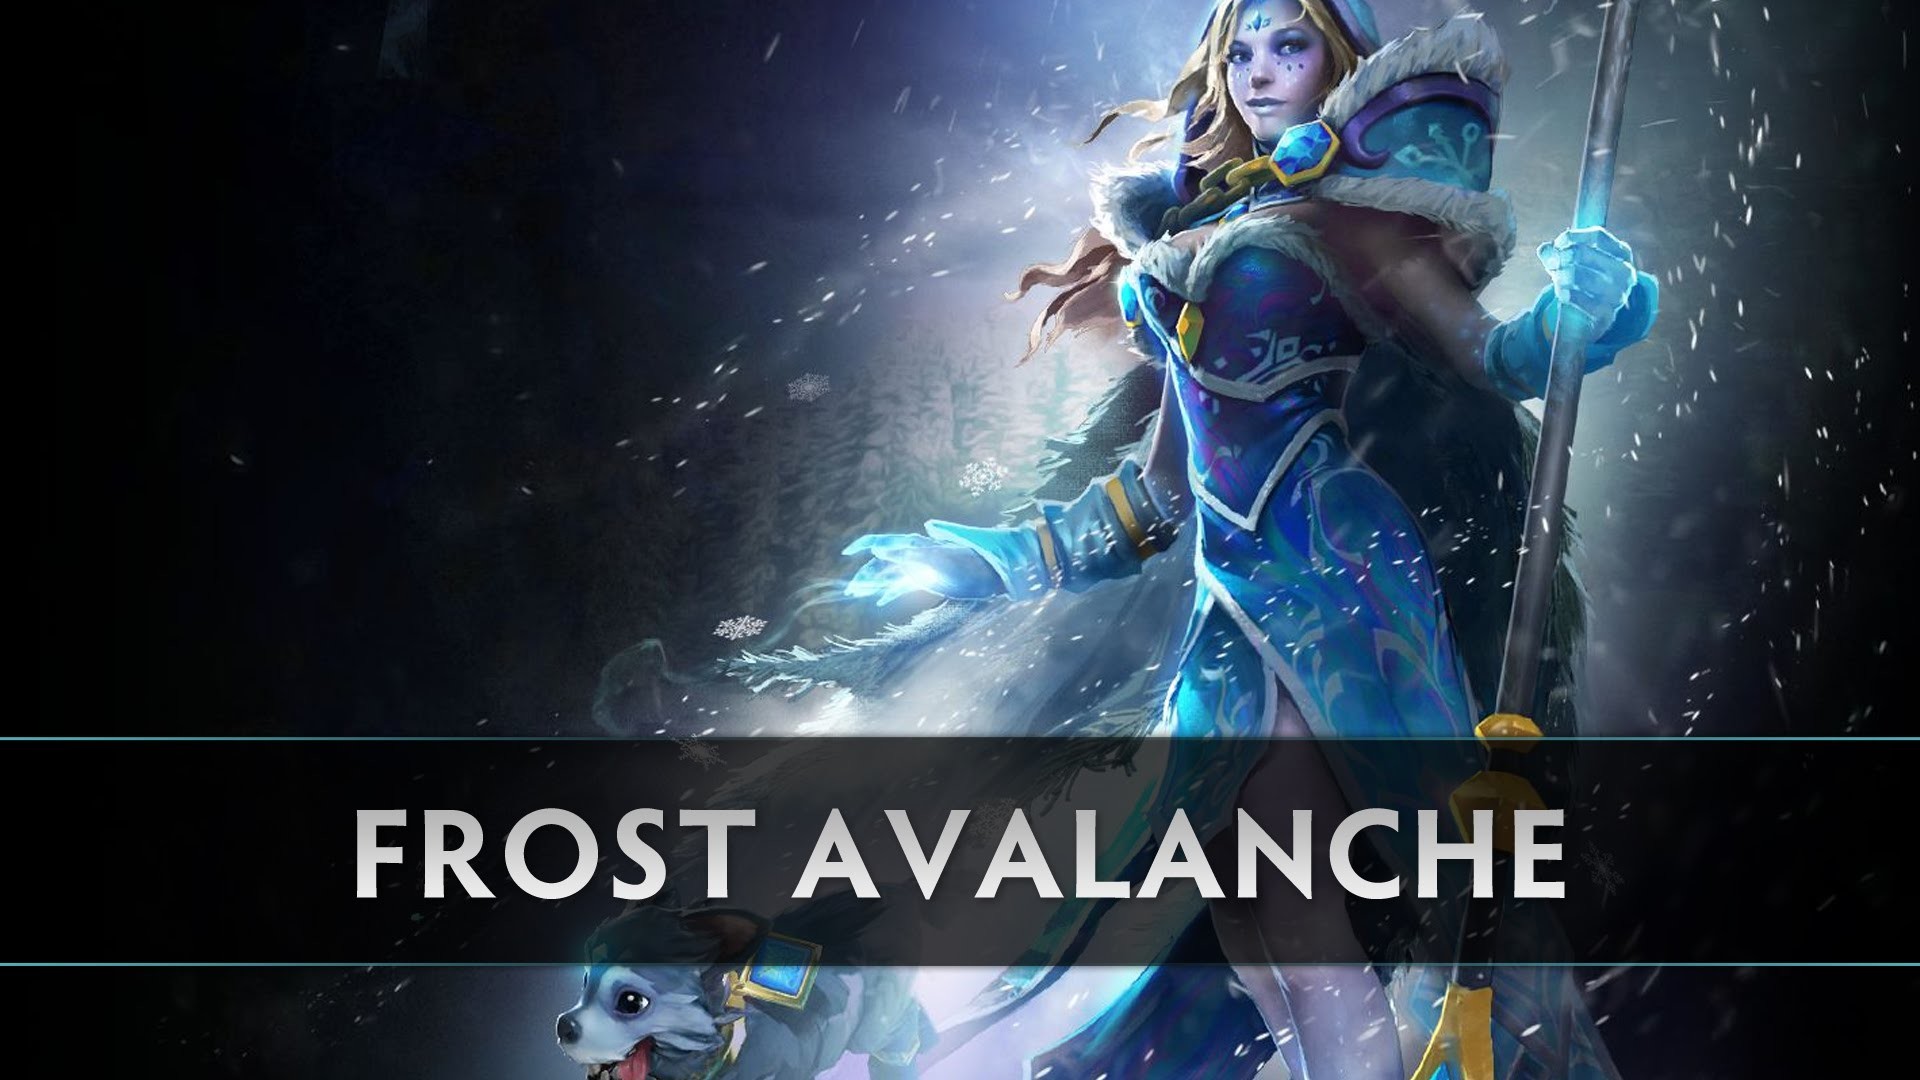 1920x1080 Dota 2 Crystal Maiden - Frost Avalanche - YouTube